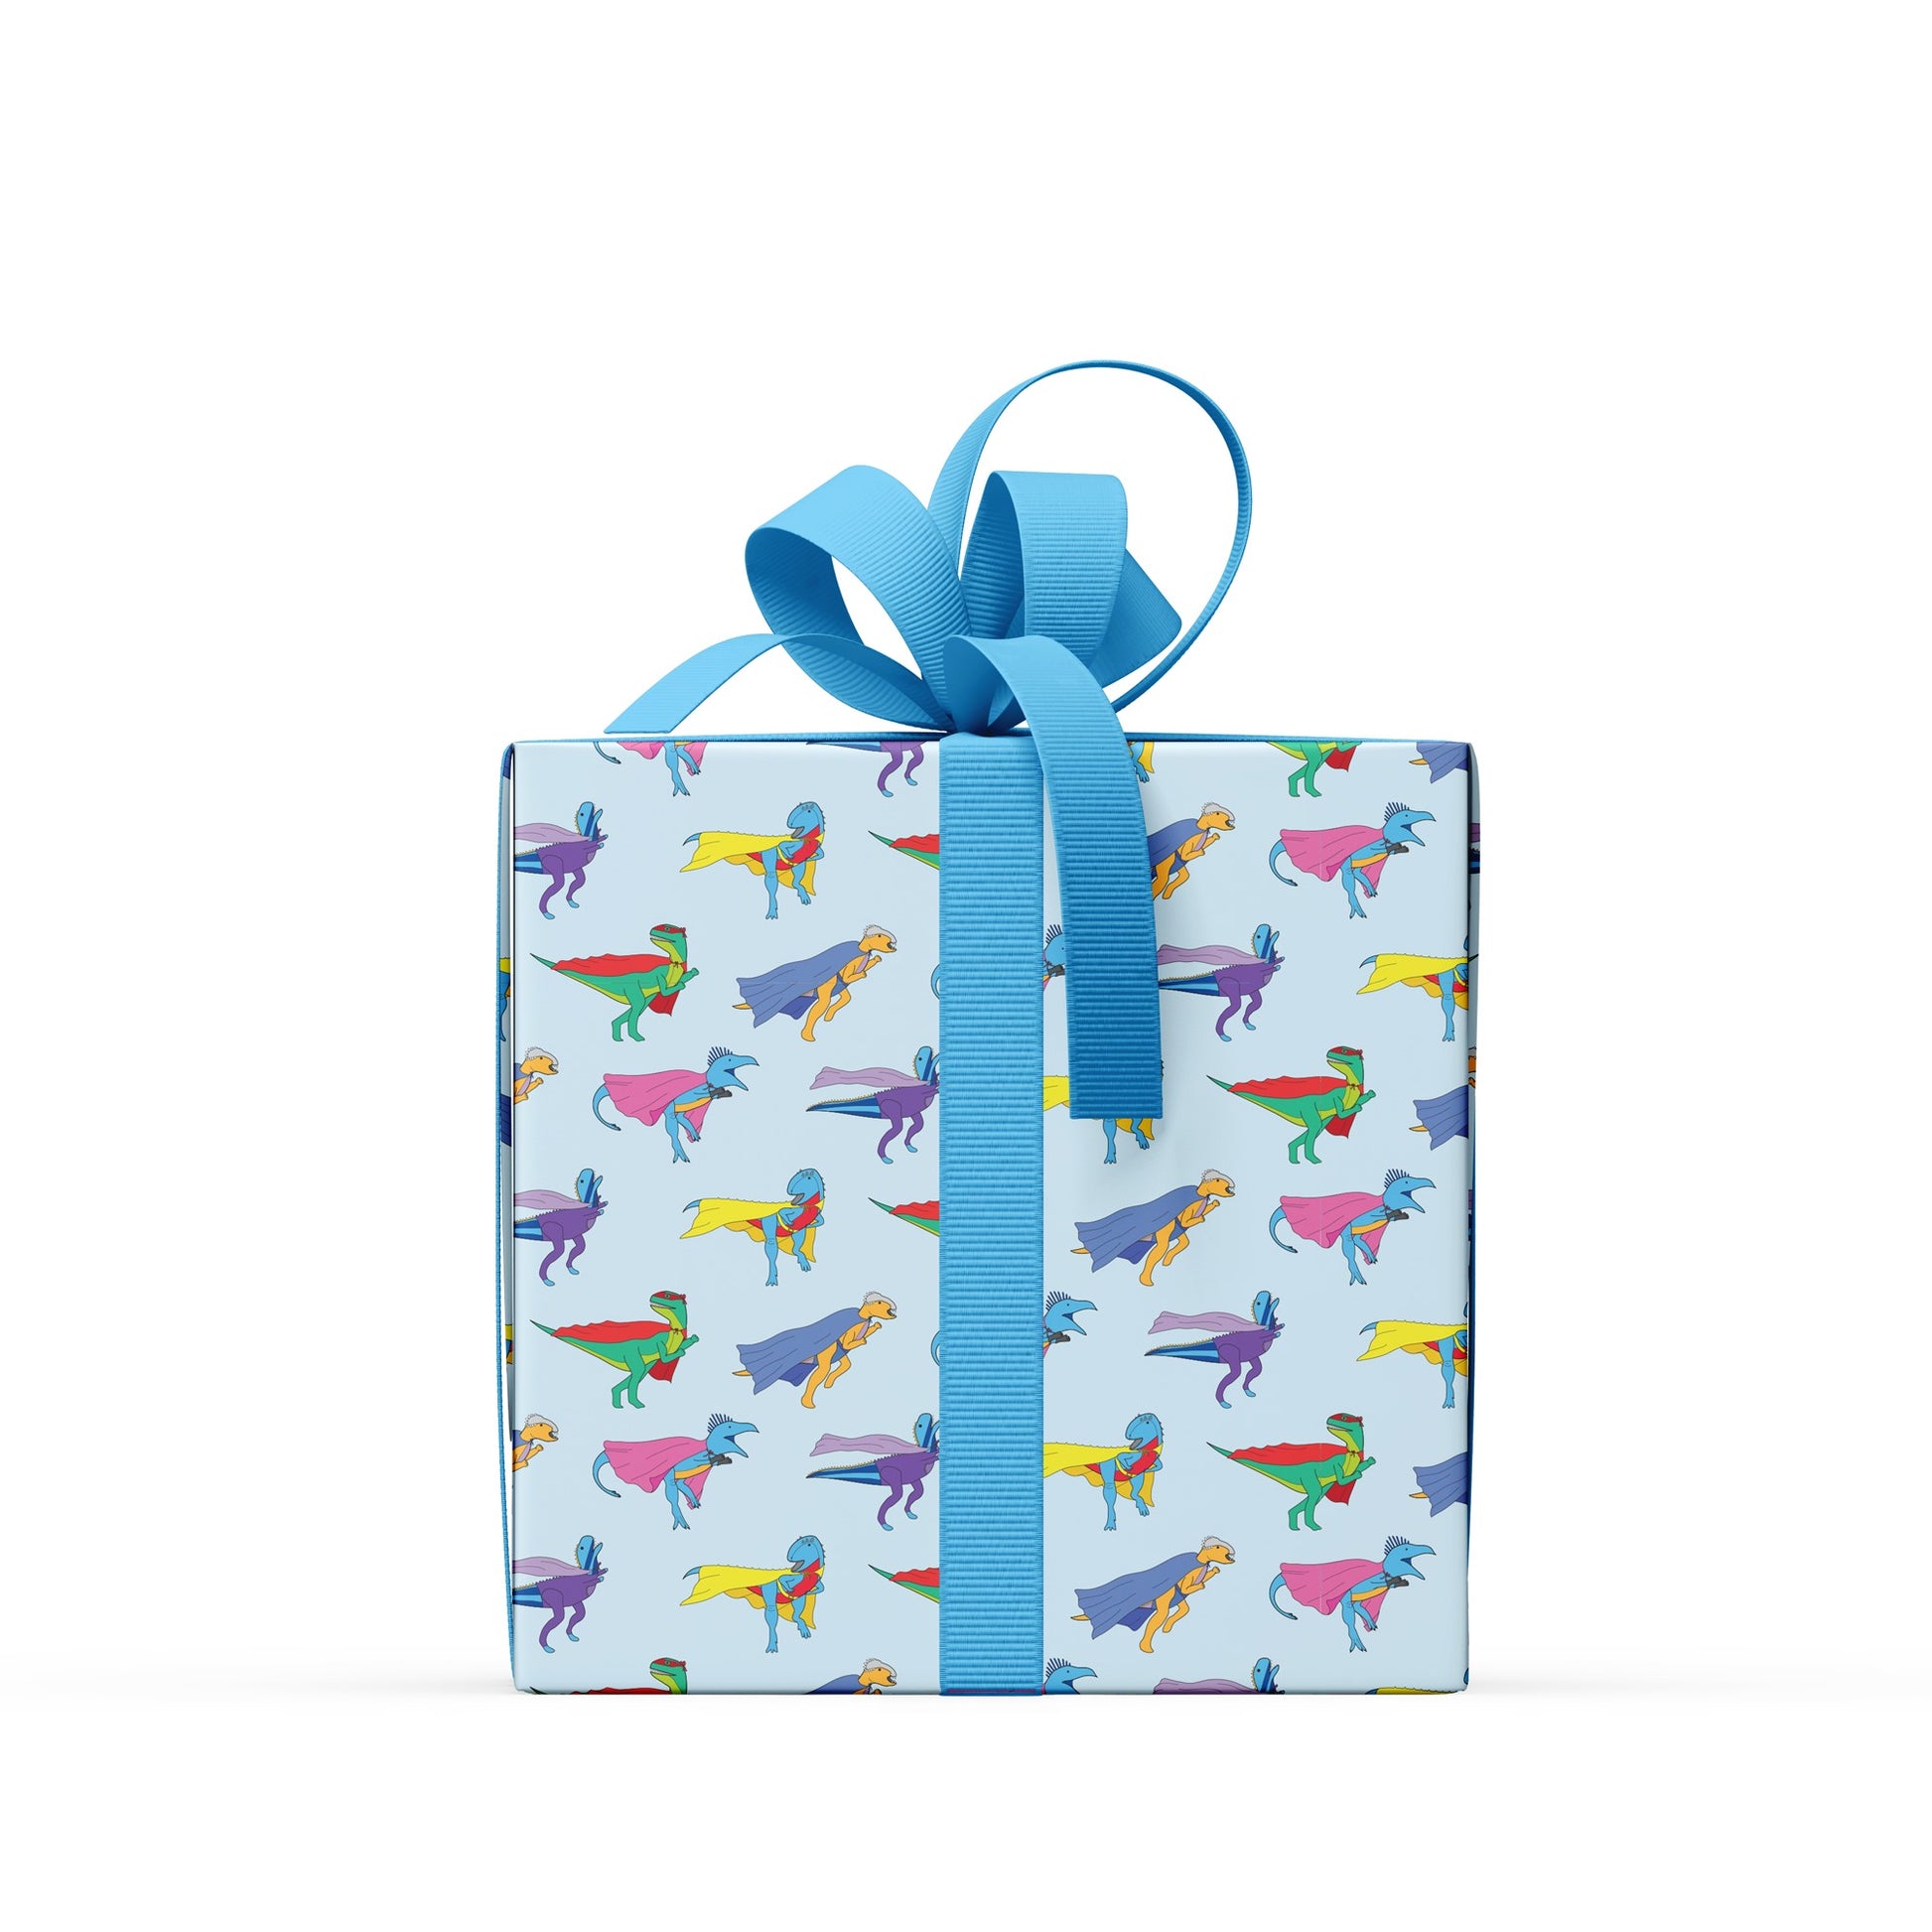 box covered in superhero dinosaur wrapping paper with a blue bow